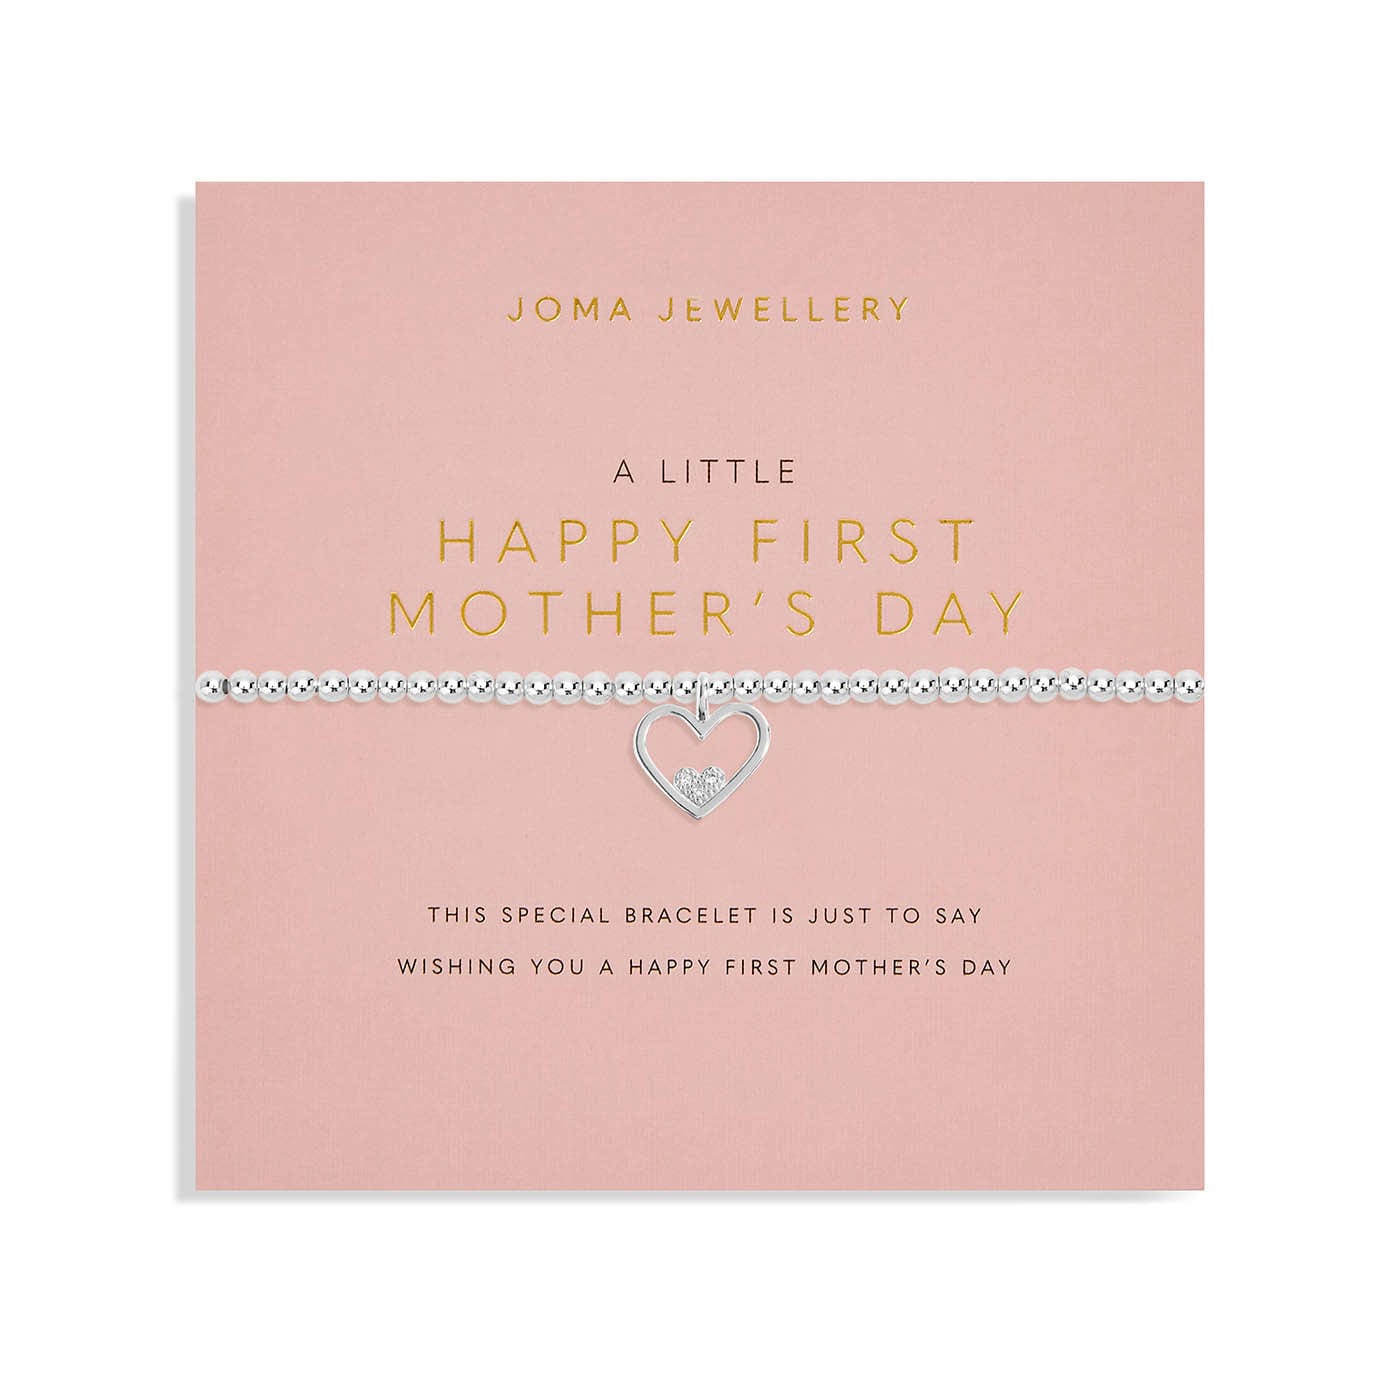 Joma Jewellery Bracelets Joma Jewellery Bracelet - A little Happy First Mother's Day